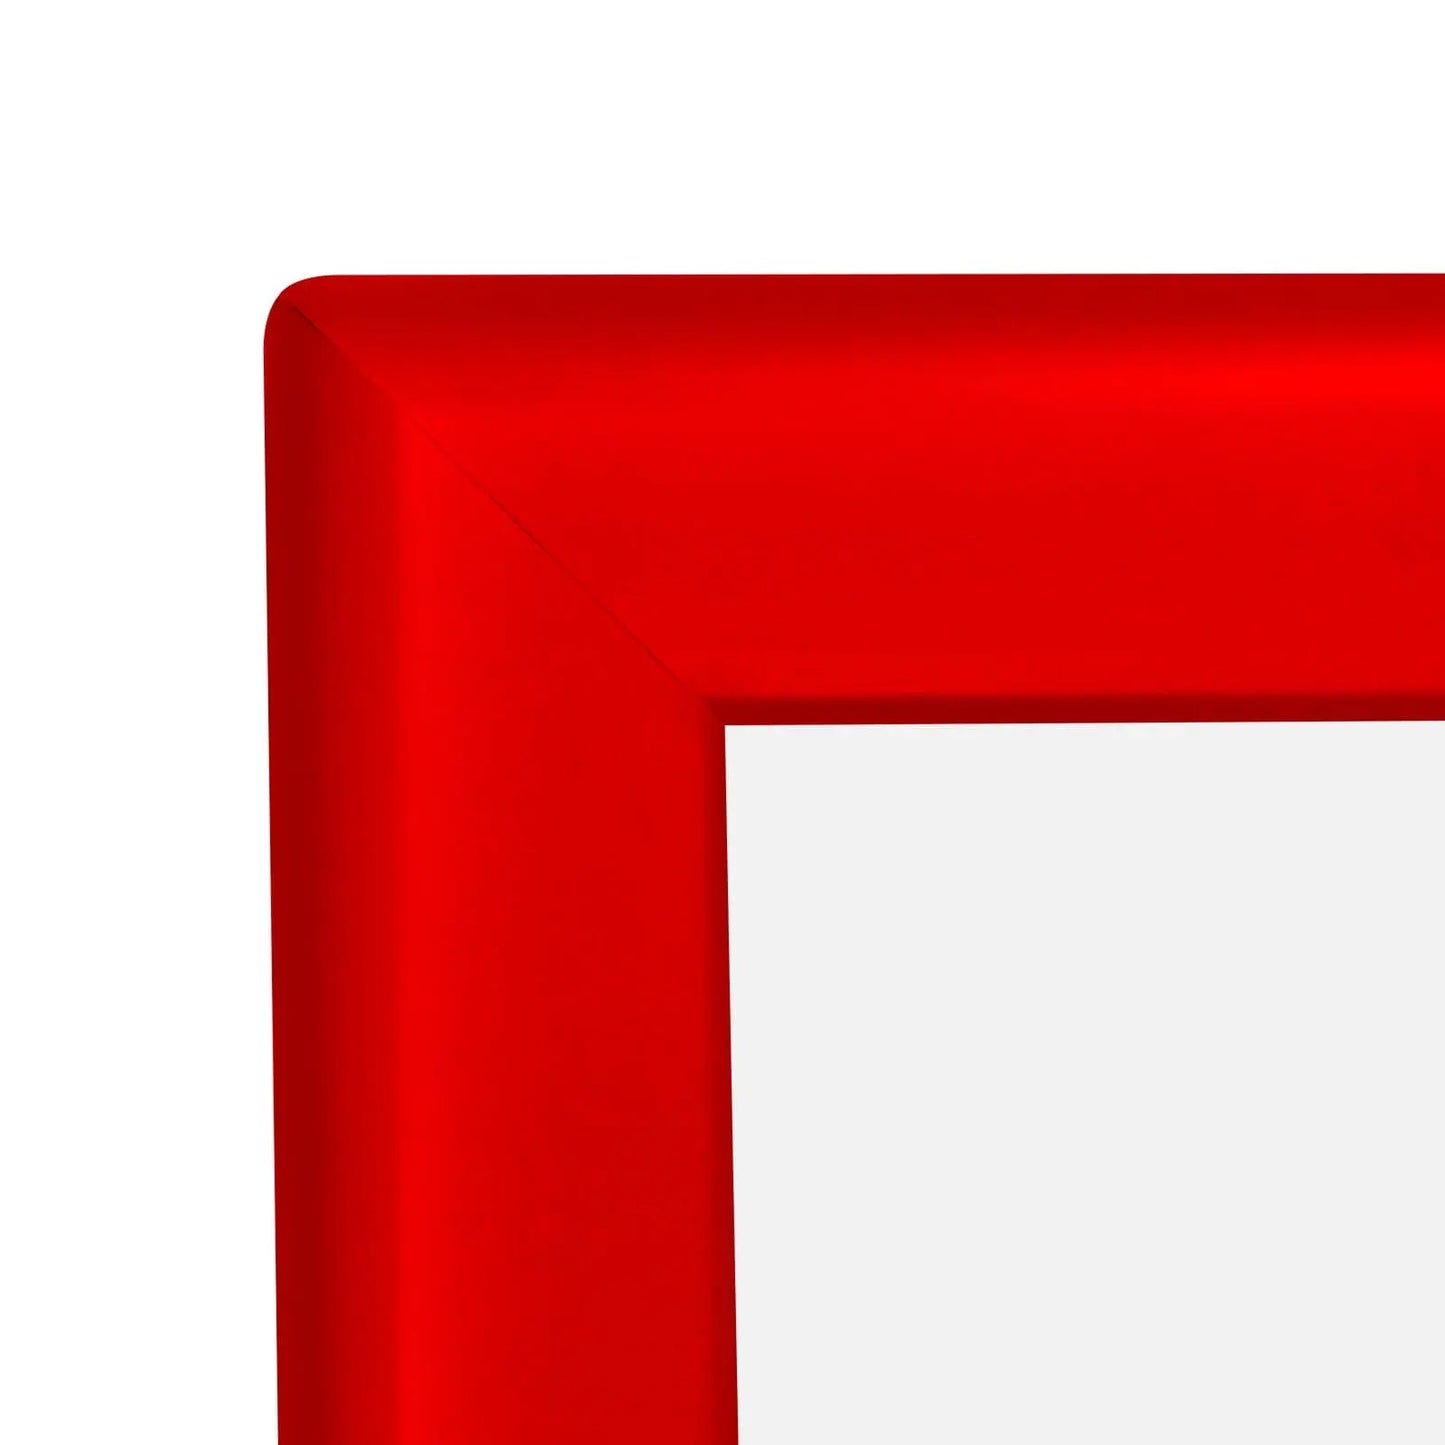 18x24 Red SnapeZo® Locking - 1.25" Profile - Snap Frames Direct